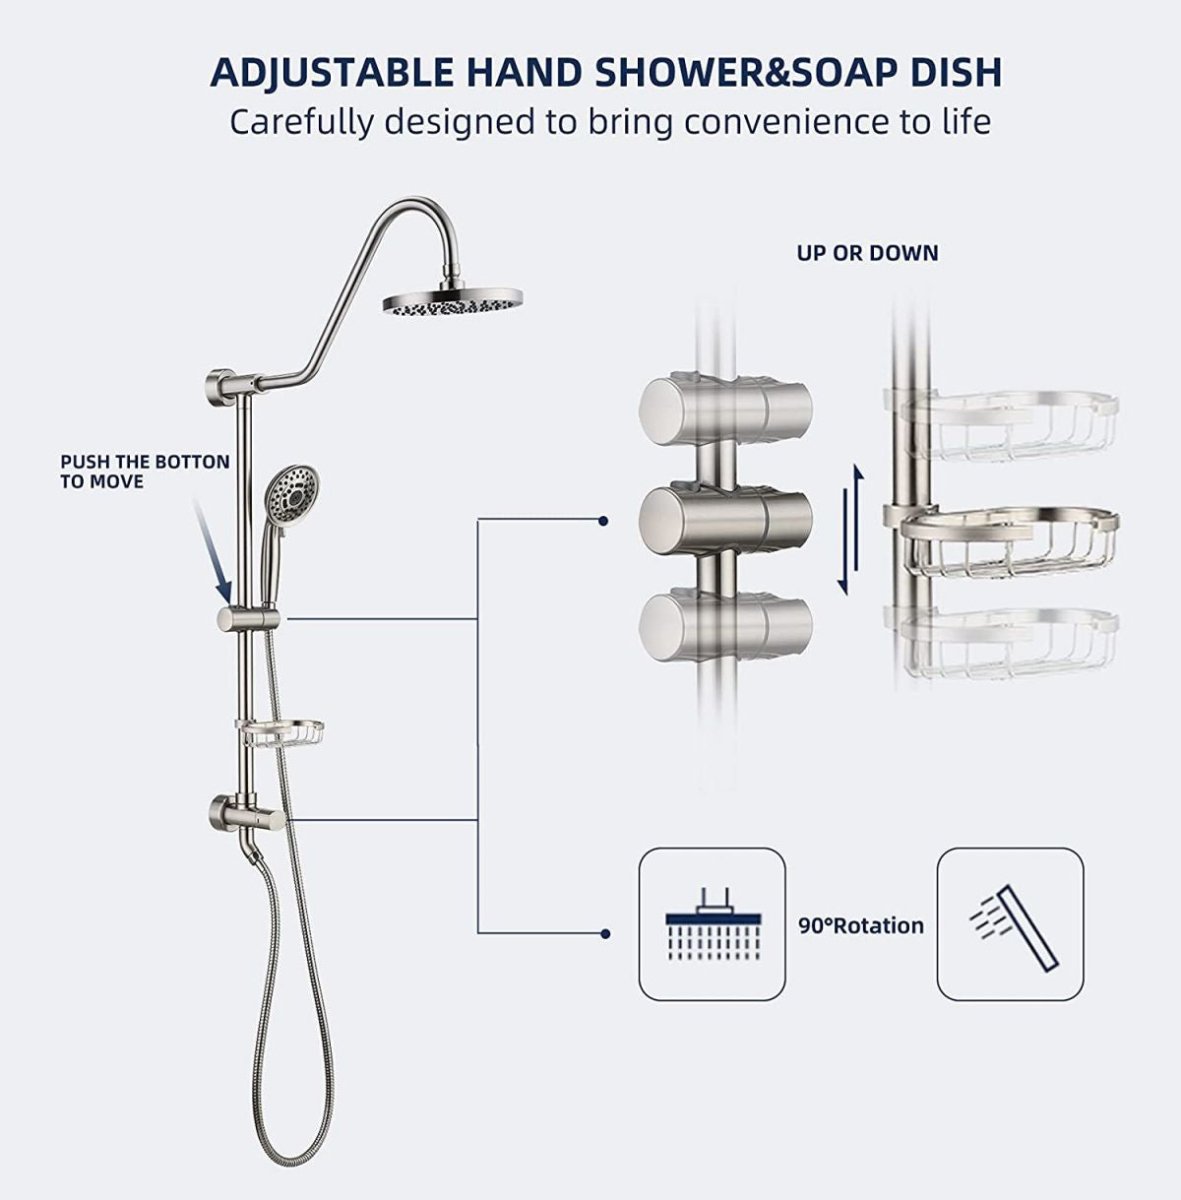 Exbrite Shower System with Rain Showerhead, Brushed Nickel Finish,5-Function Hand Shower, Adjustable Slide Bar and Soap Dish for Bathroom Shower Faucet Set